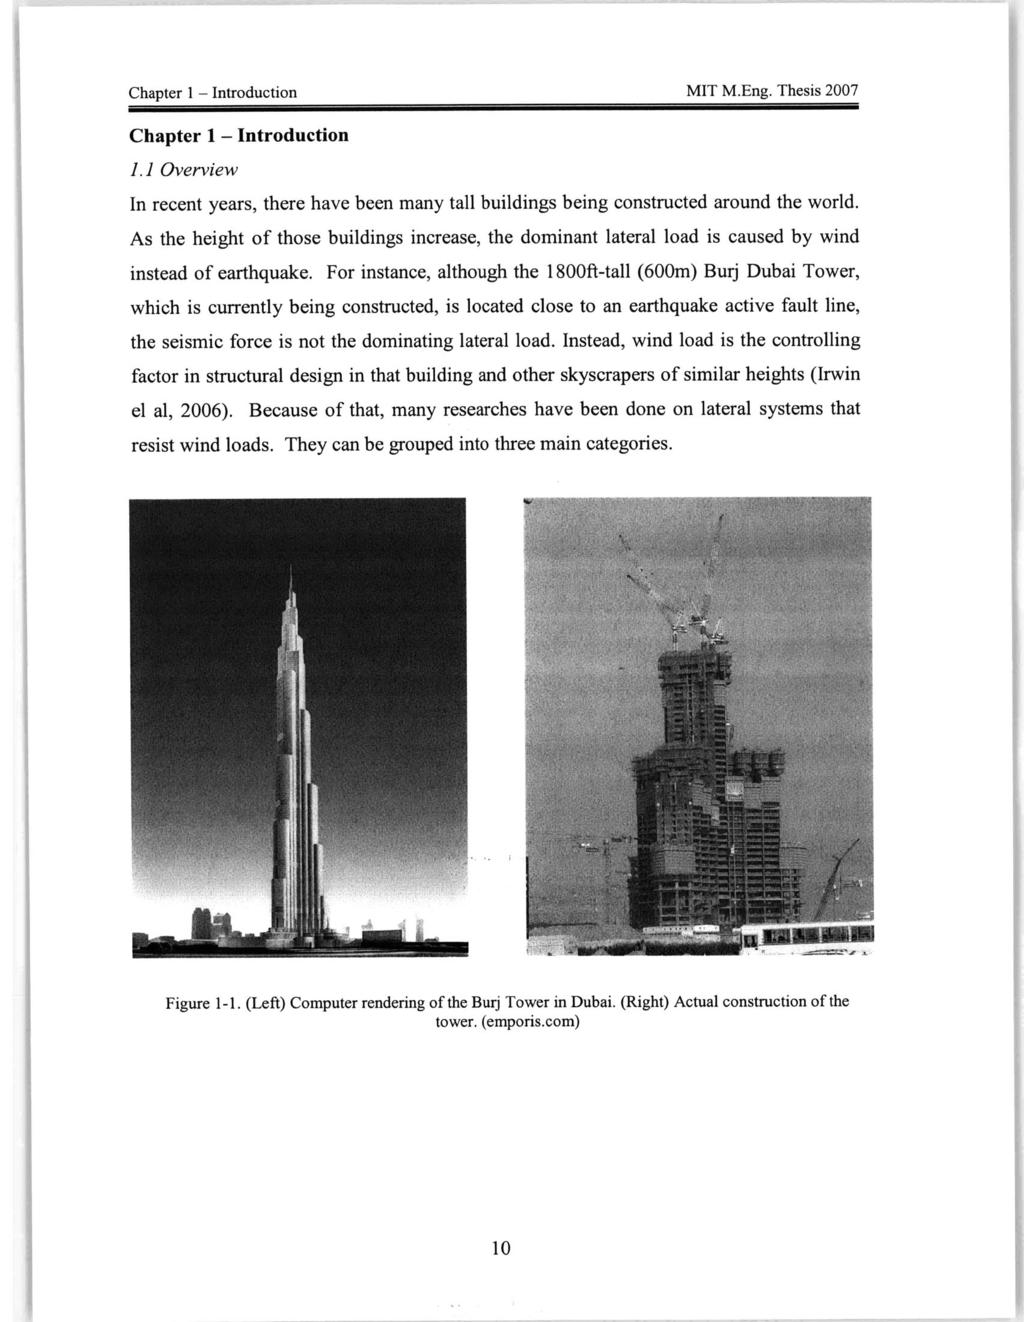 Chapter I - Introduction MIT M.Eng. Thesis 007 Chapter 1 - Introduction 1.1 Overview In recent years, there have been many tall buildings being constructed around the world.